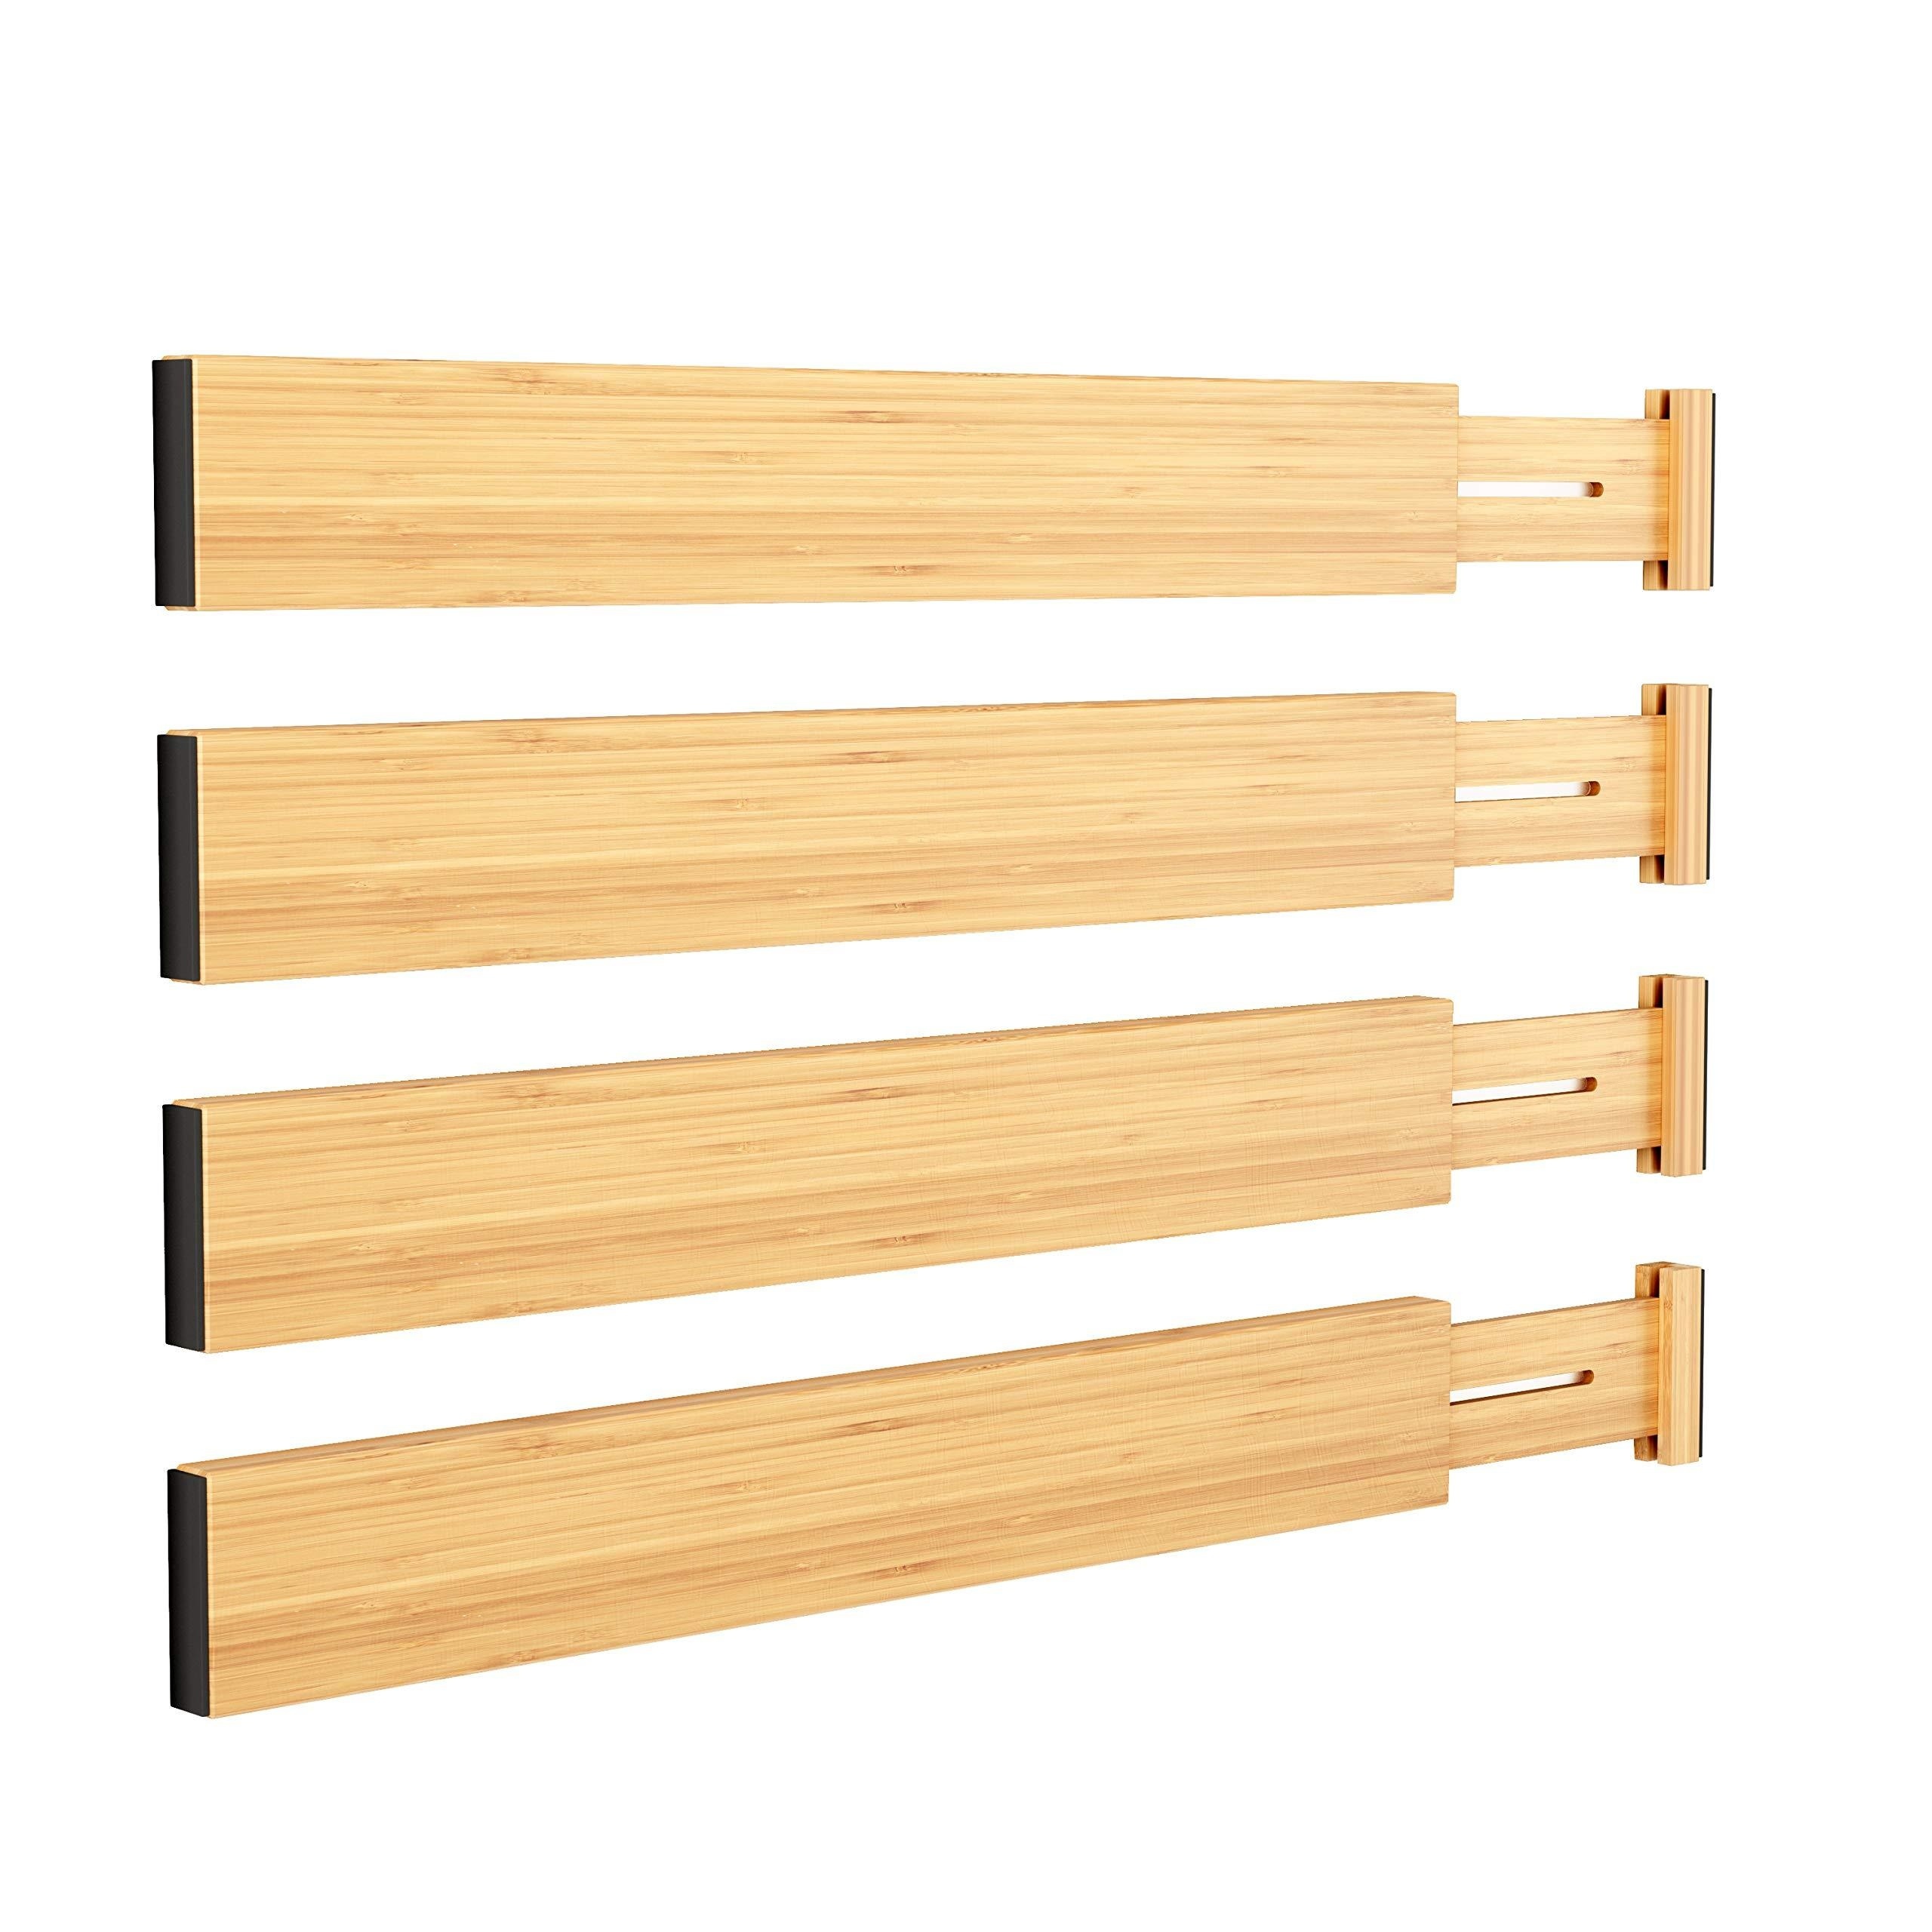 Bamboo Drawer Dividers Organizers Adjustable Expandable Wooden